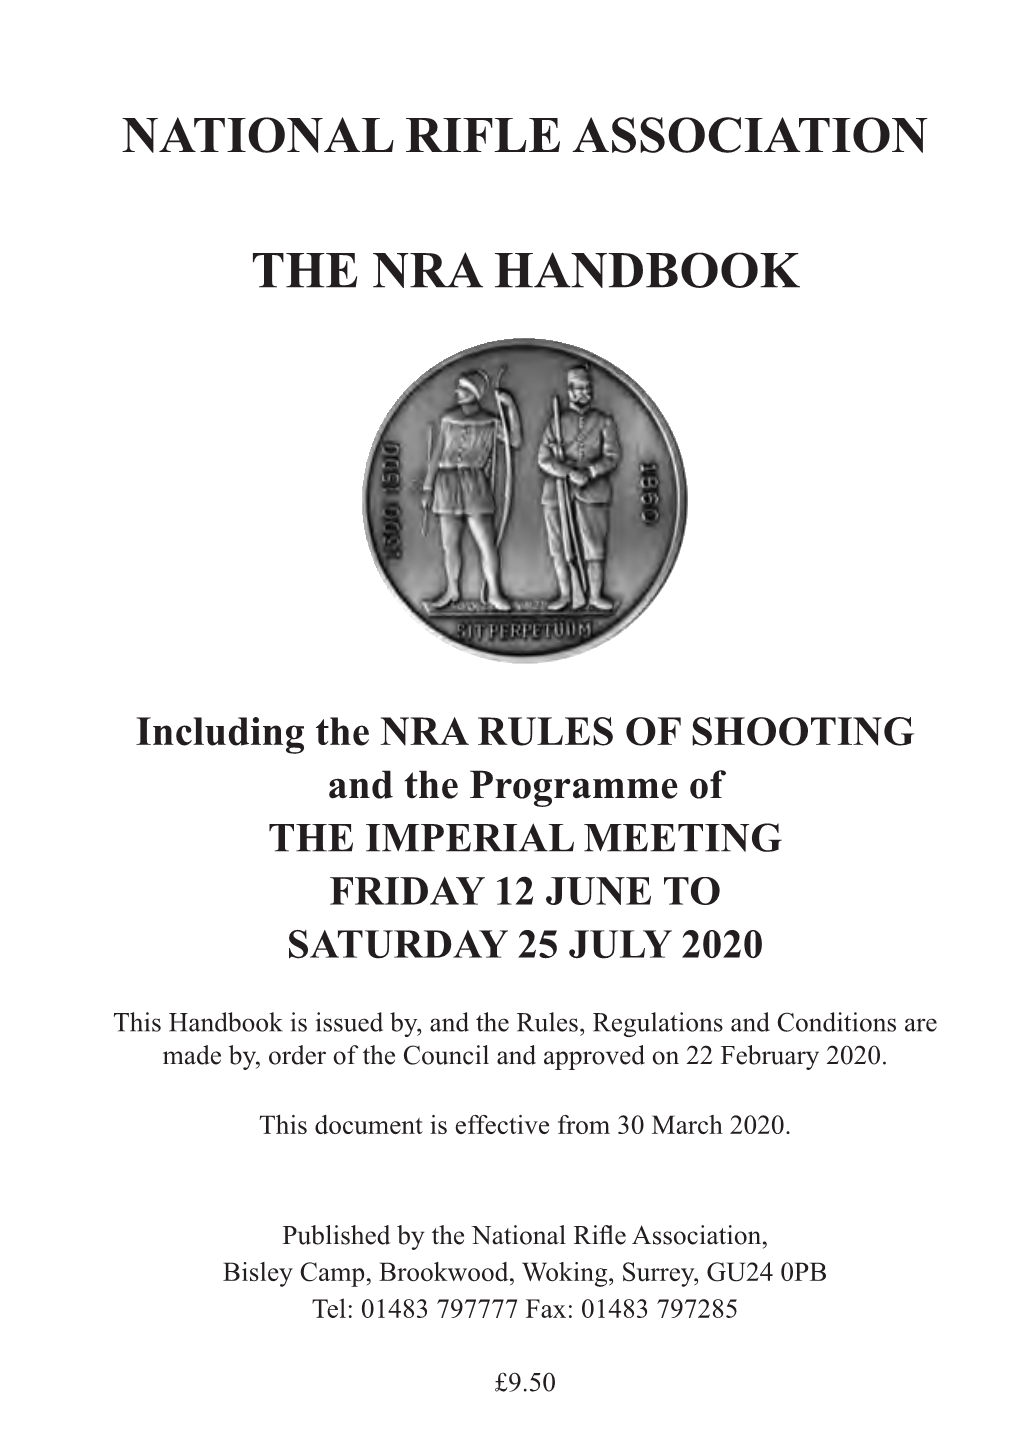 Bisley Bible) Is Available from the NRA Office and Also Contains the Rules for ‘As Issued’ Classes (NRA Sra)